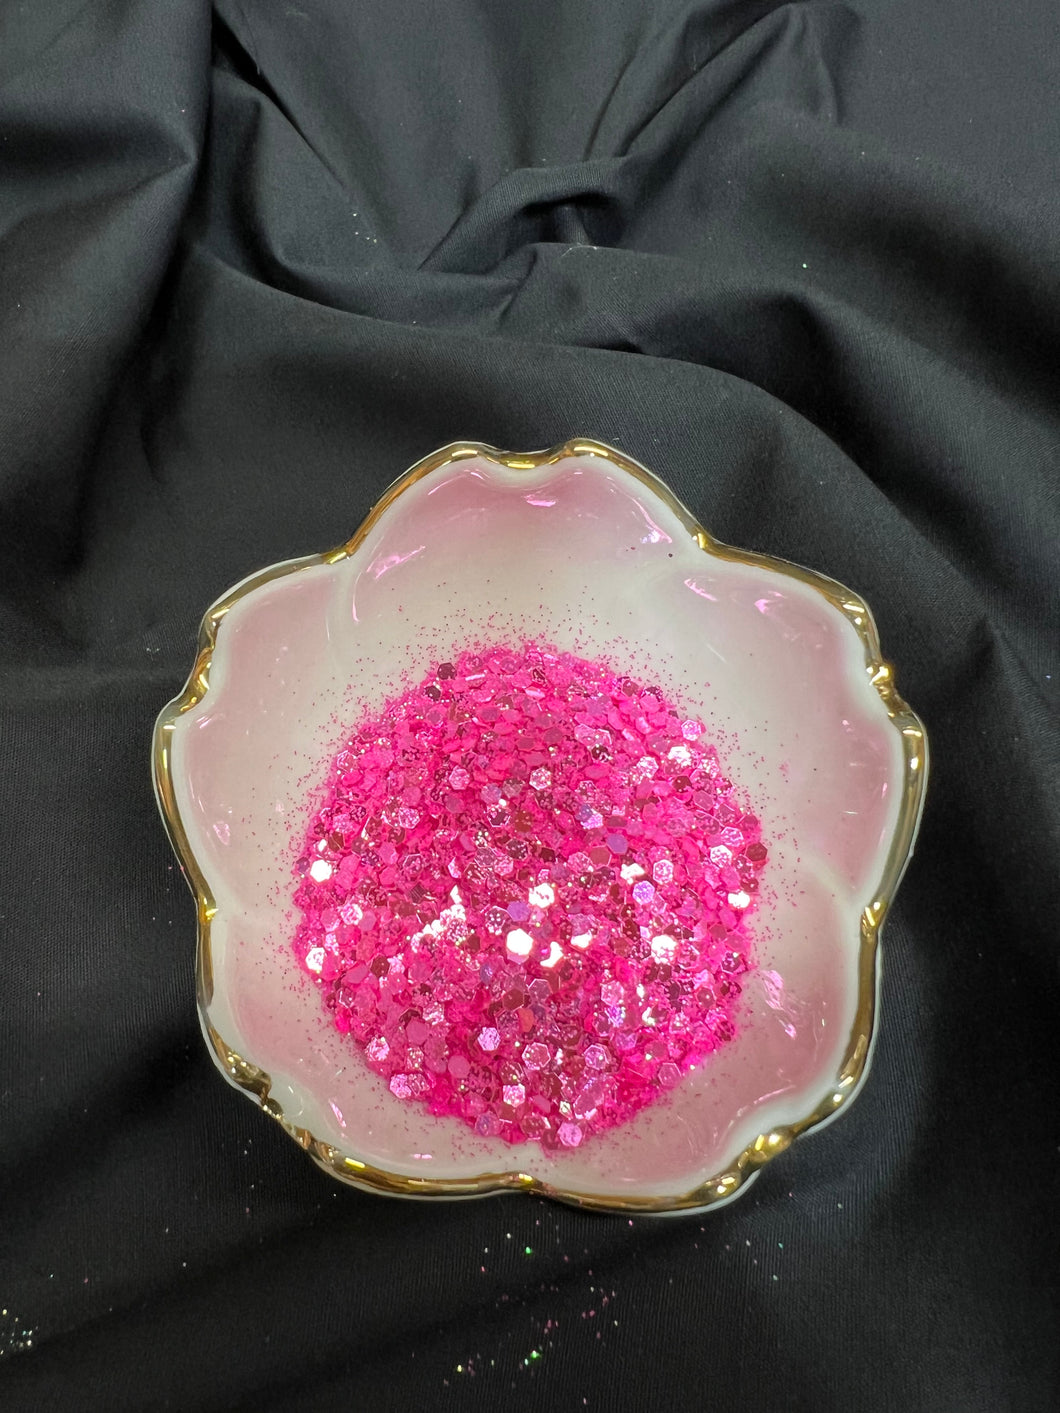 Chunky Hot Pink - Glitter & Pixie Dust Exclusive! 2 oz pink chunky glitter  - NEW!